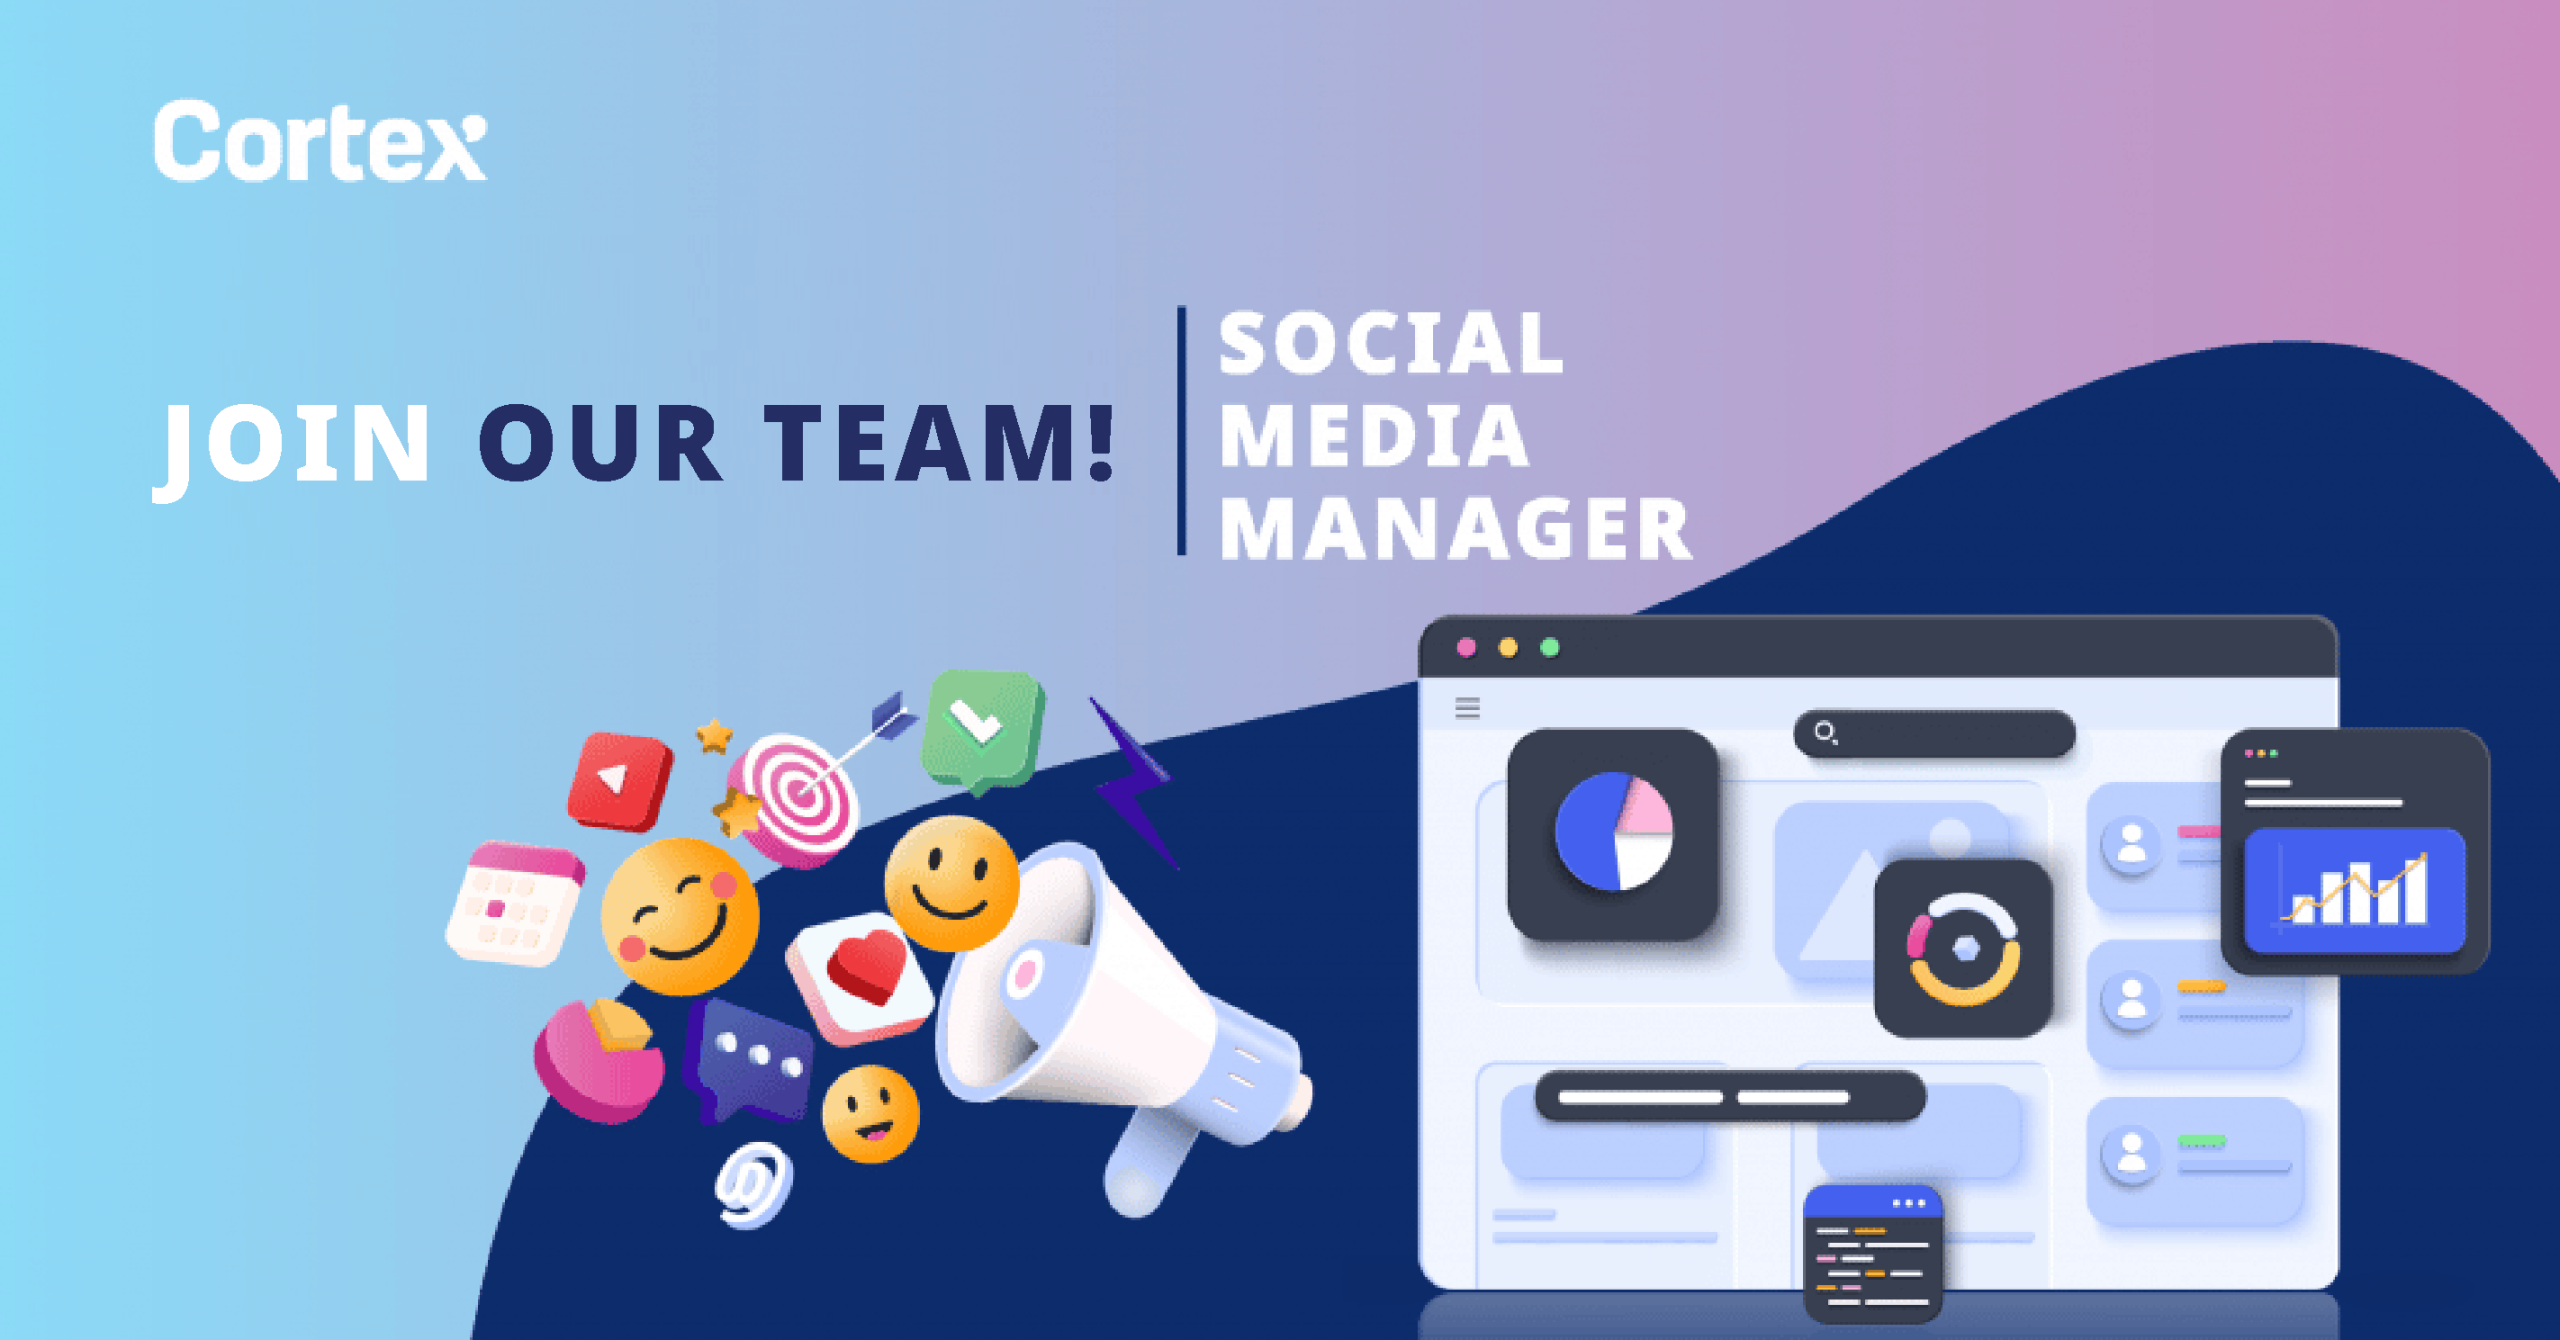 Job opportunity: Apply for the position of Social Media Manager!